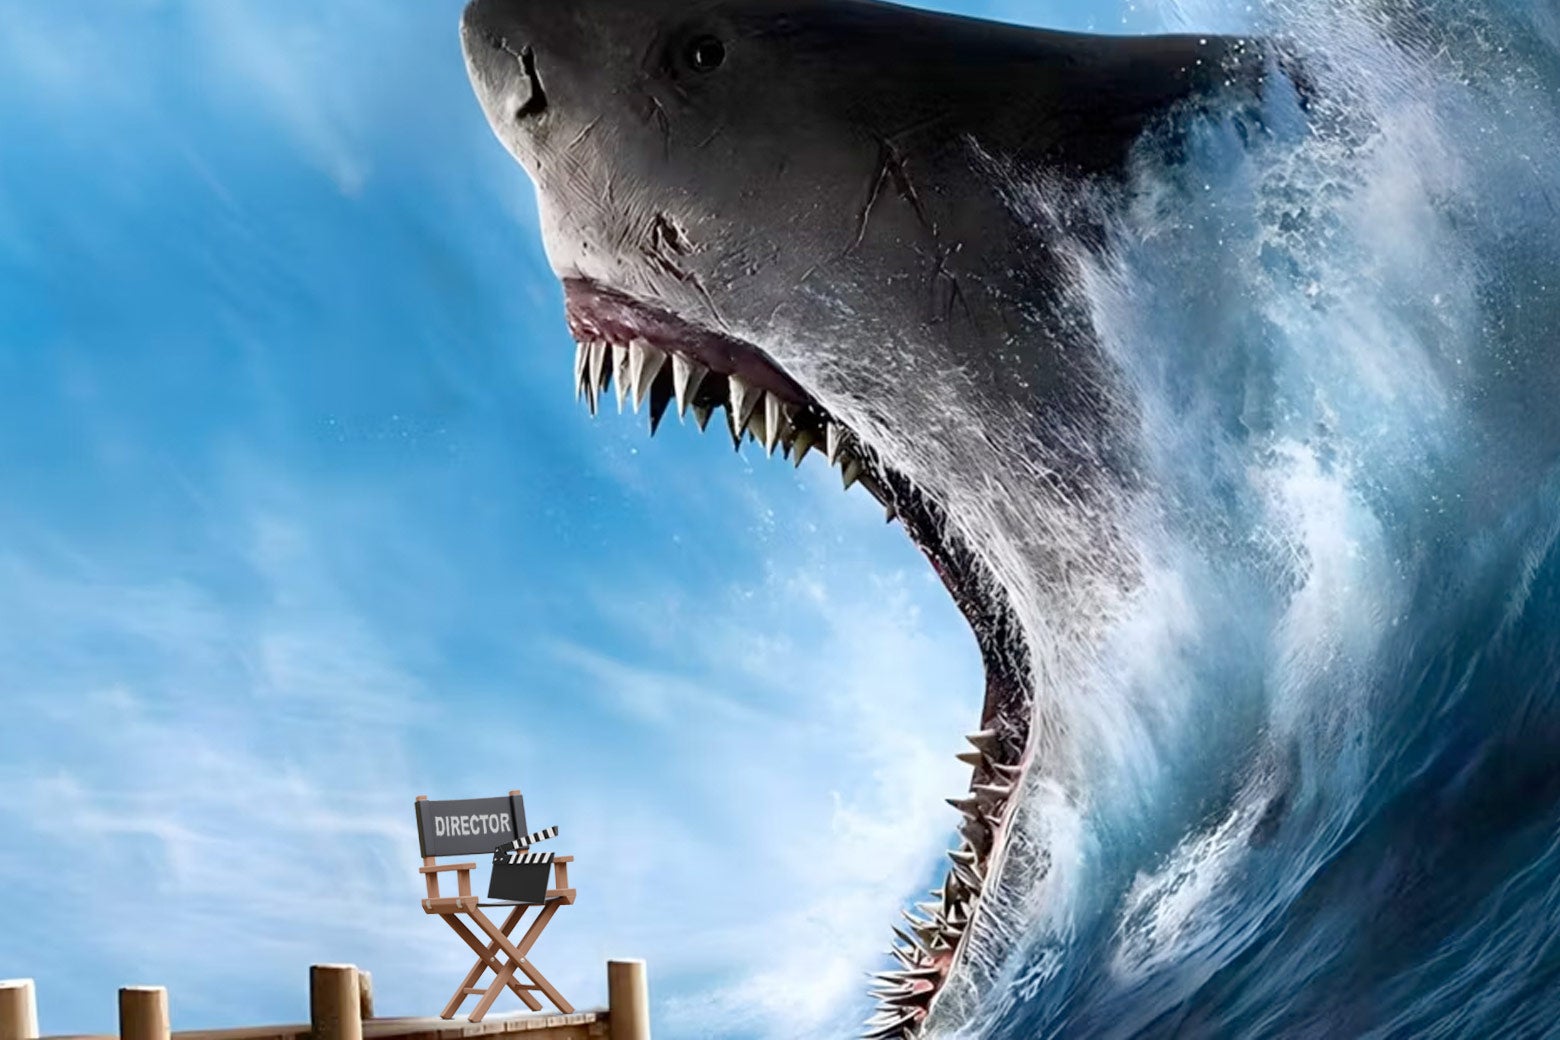 The shark from The Meg is about to eat a director's chair.